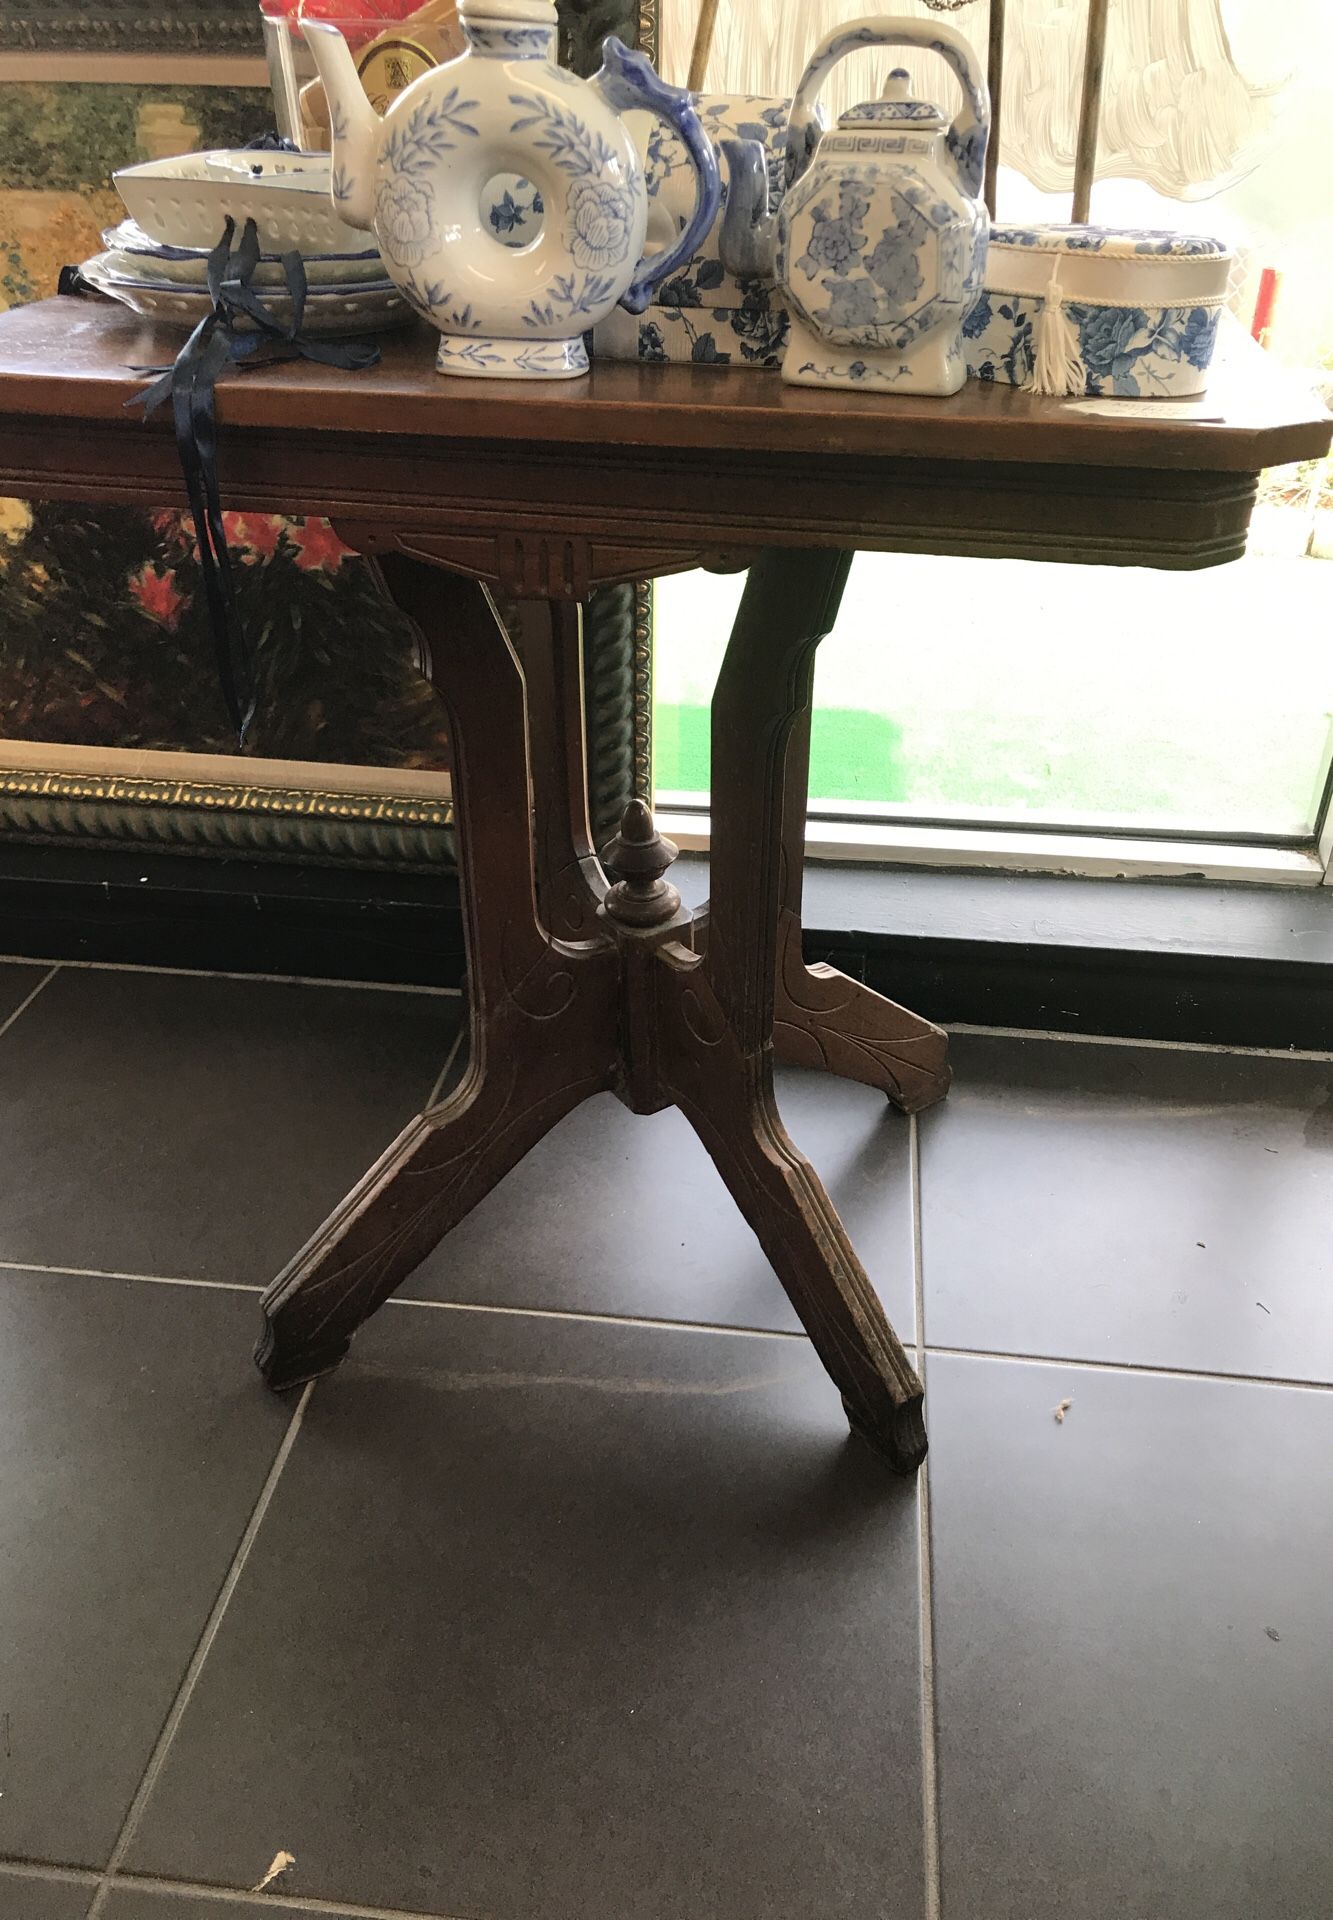 Antique side table purchased from the Colonade Restaurant.